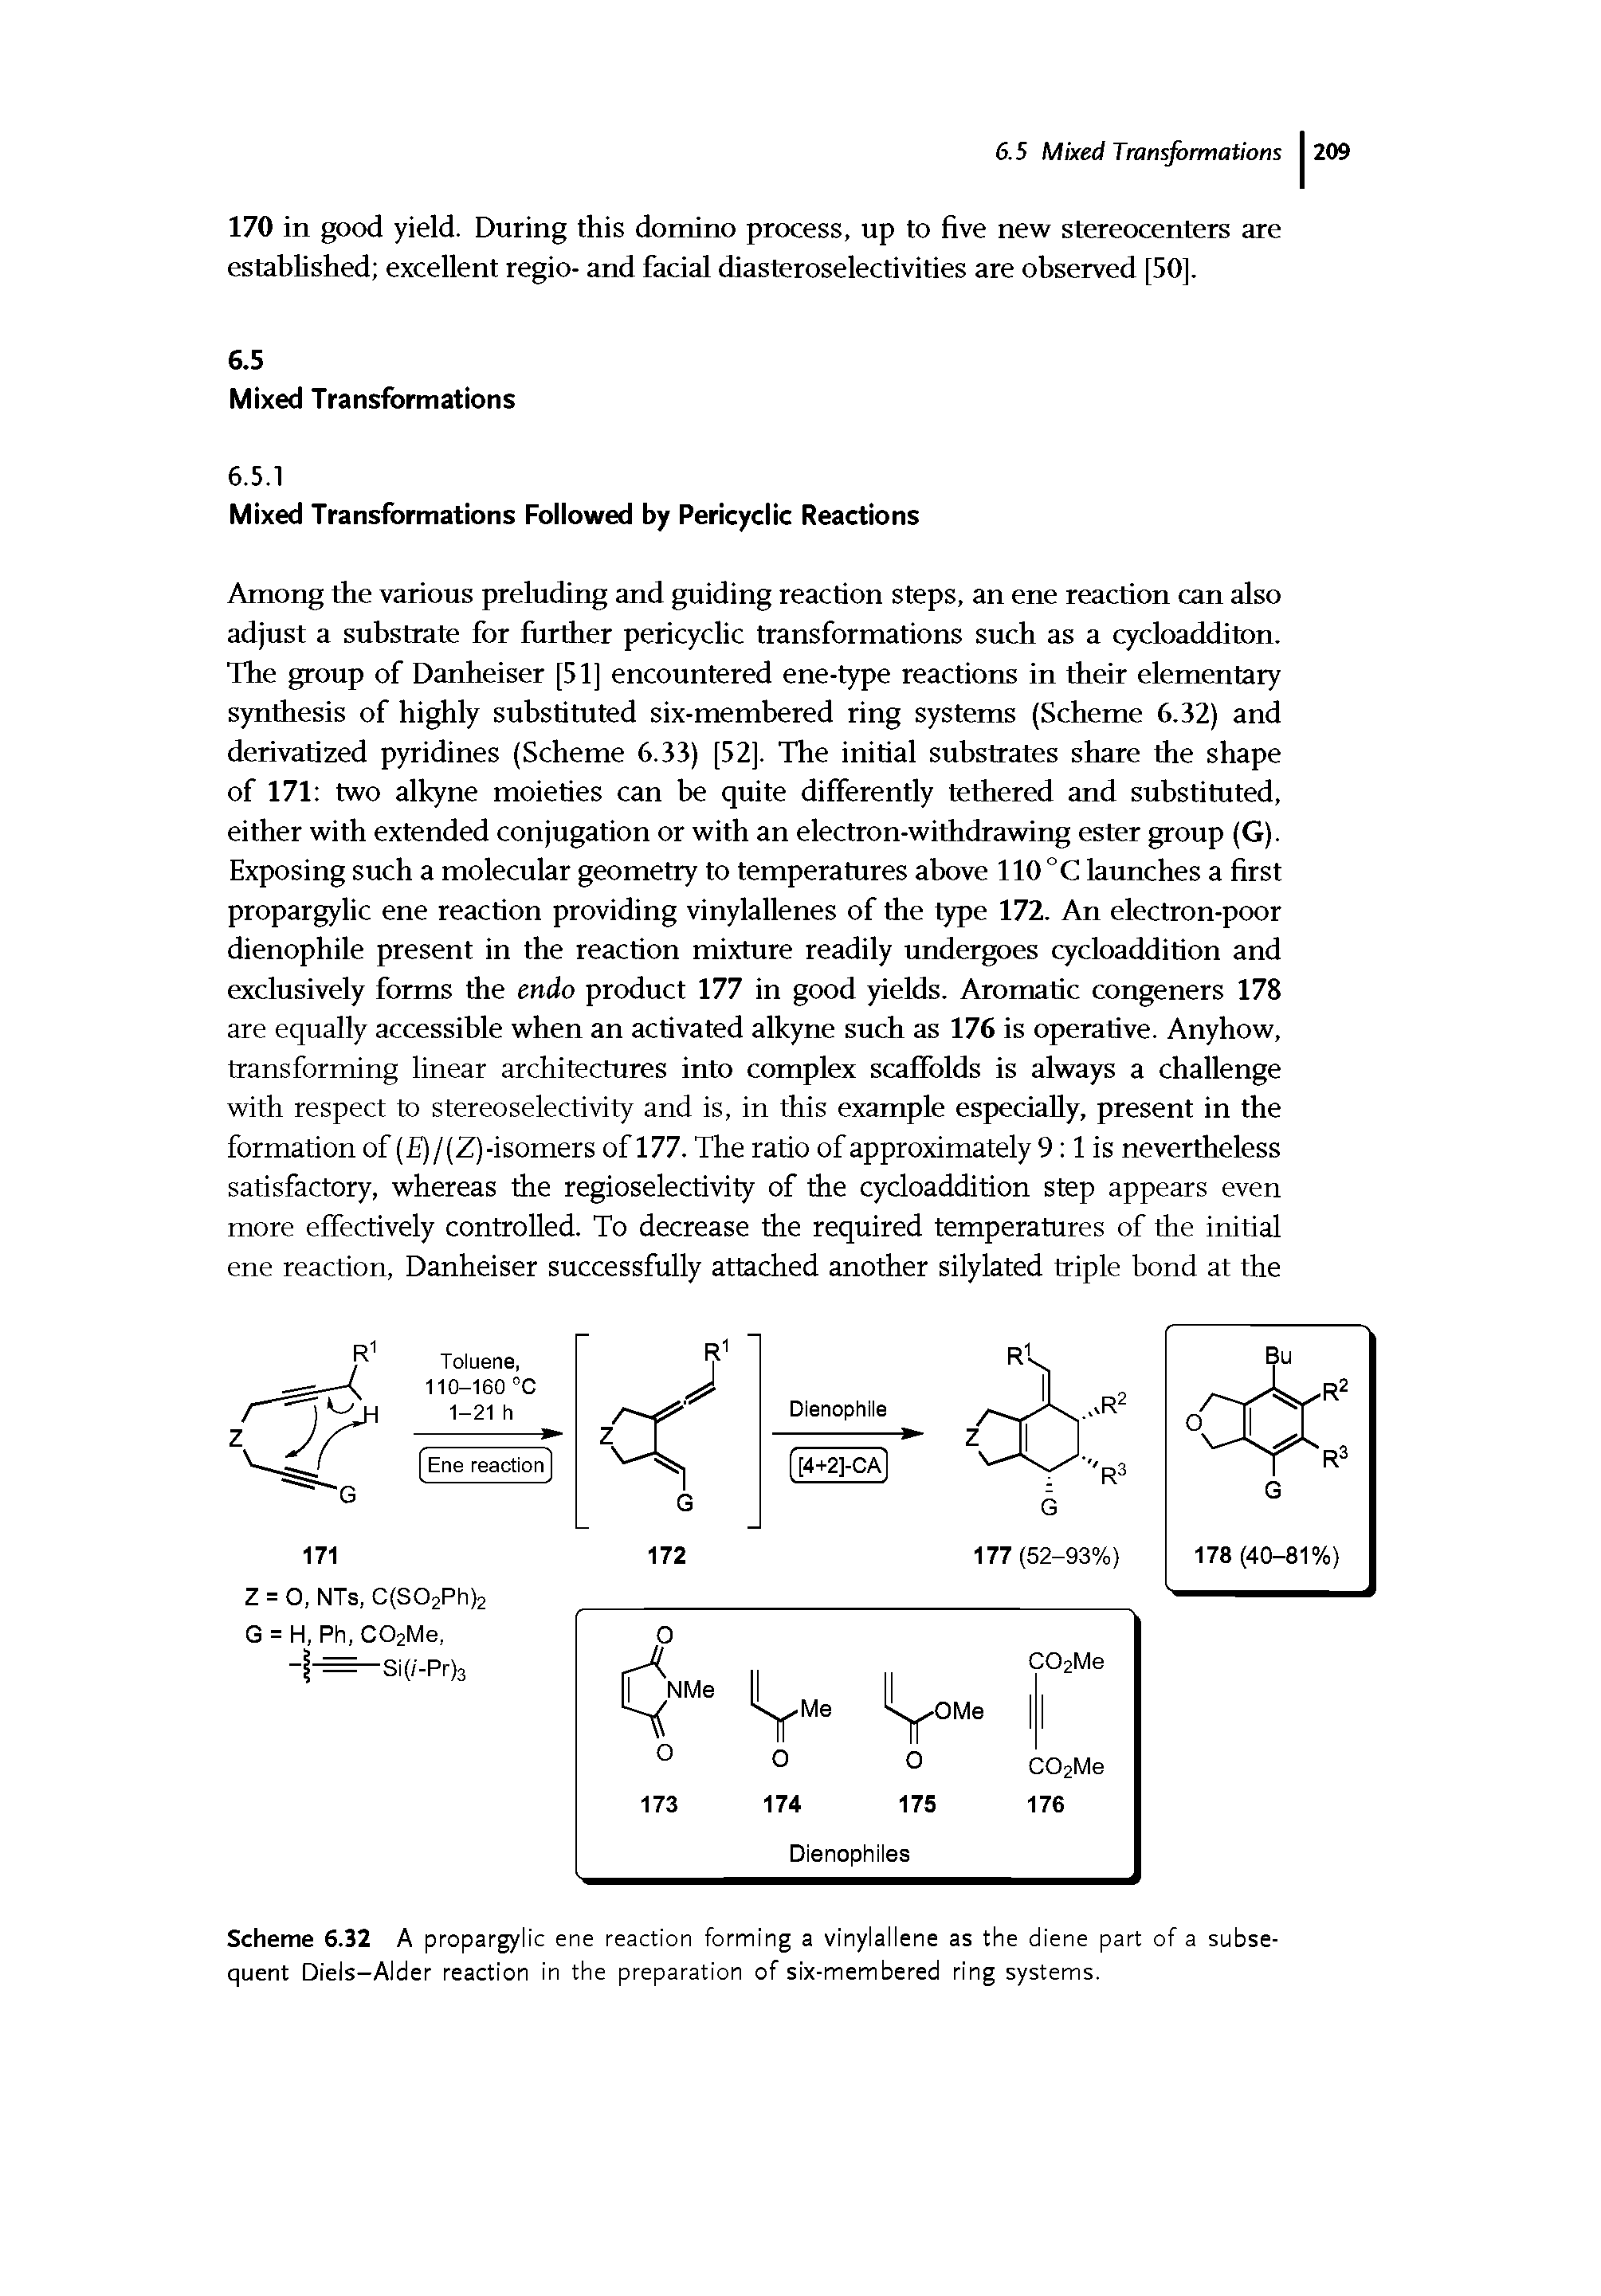 Scheme 6.32 A propargylic ene reaction forming a vinylallene as the diene part of a subsequent Diels-Alder reaction in the preparation of six-membered ring systems.